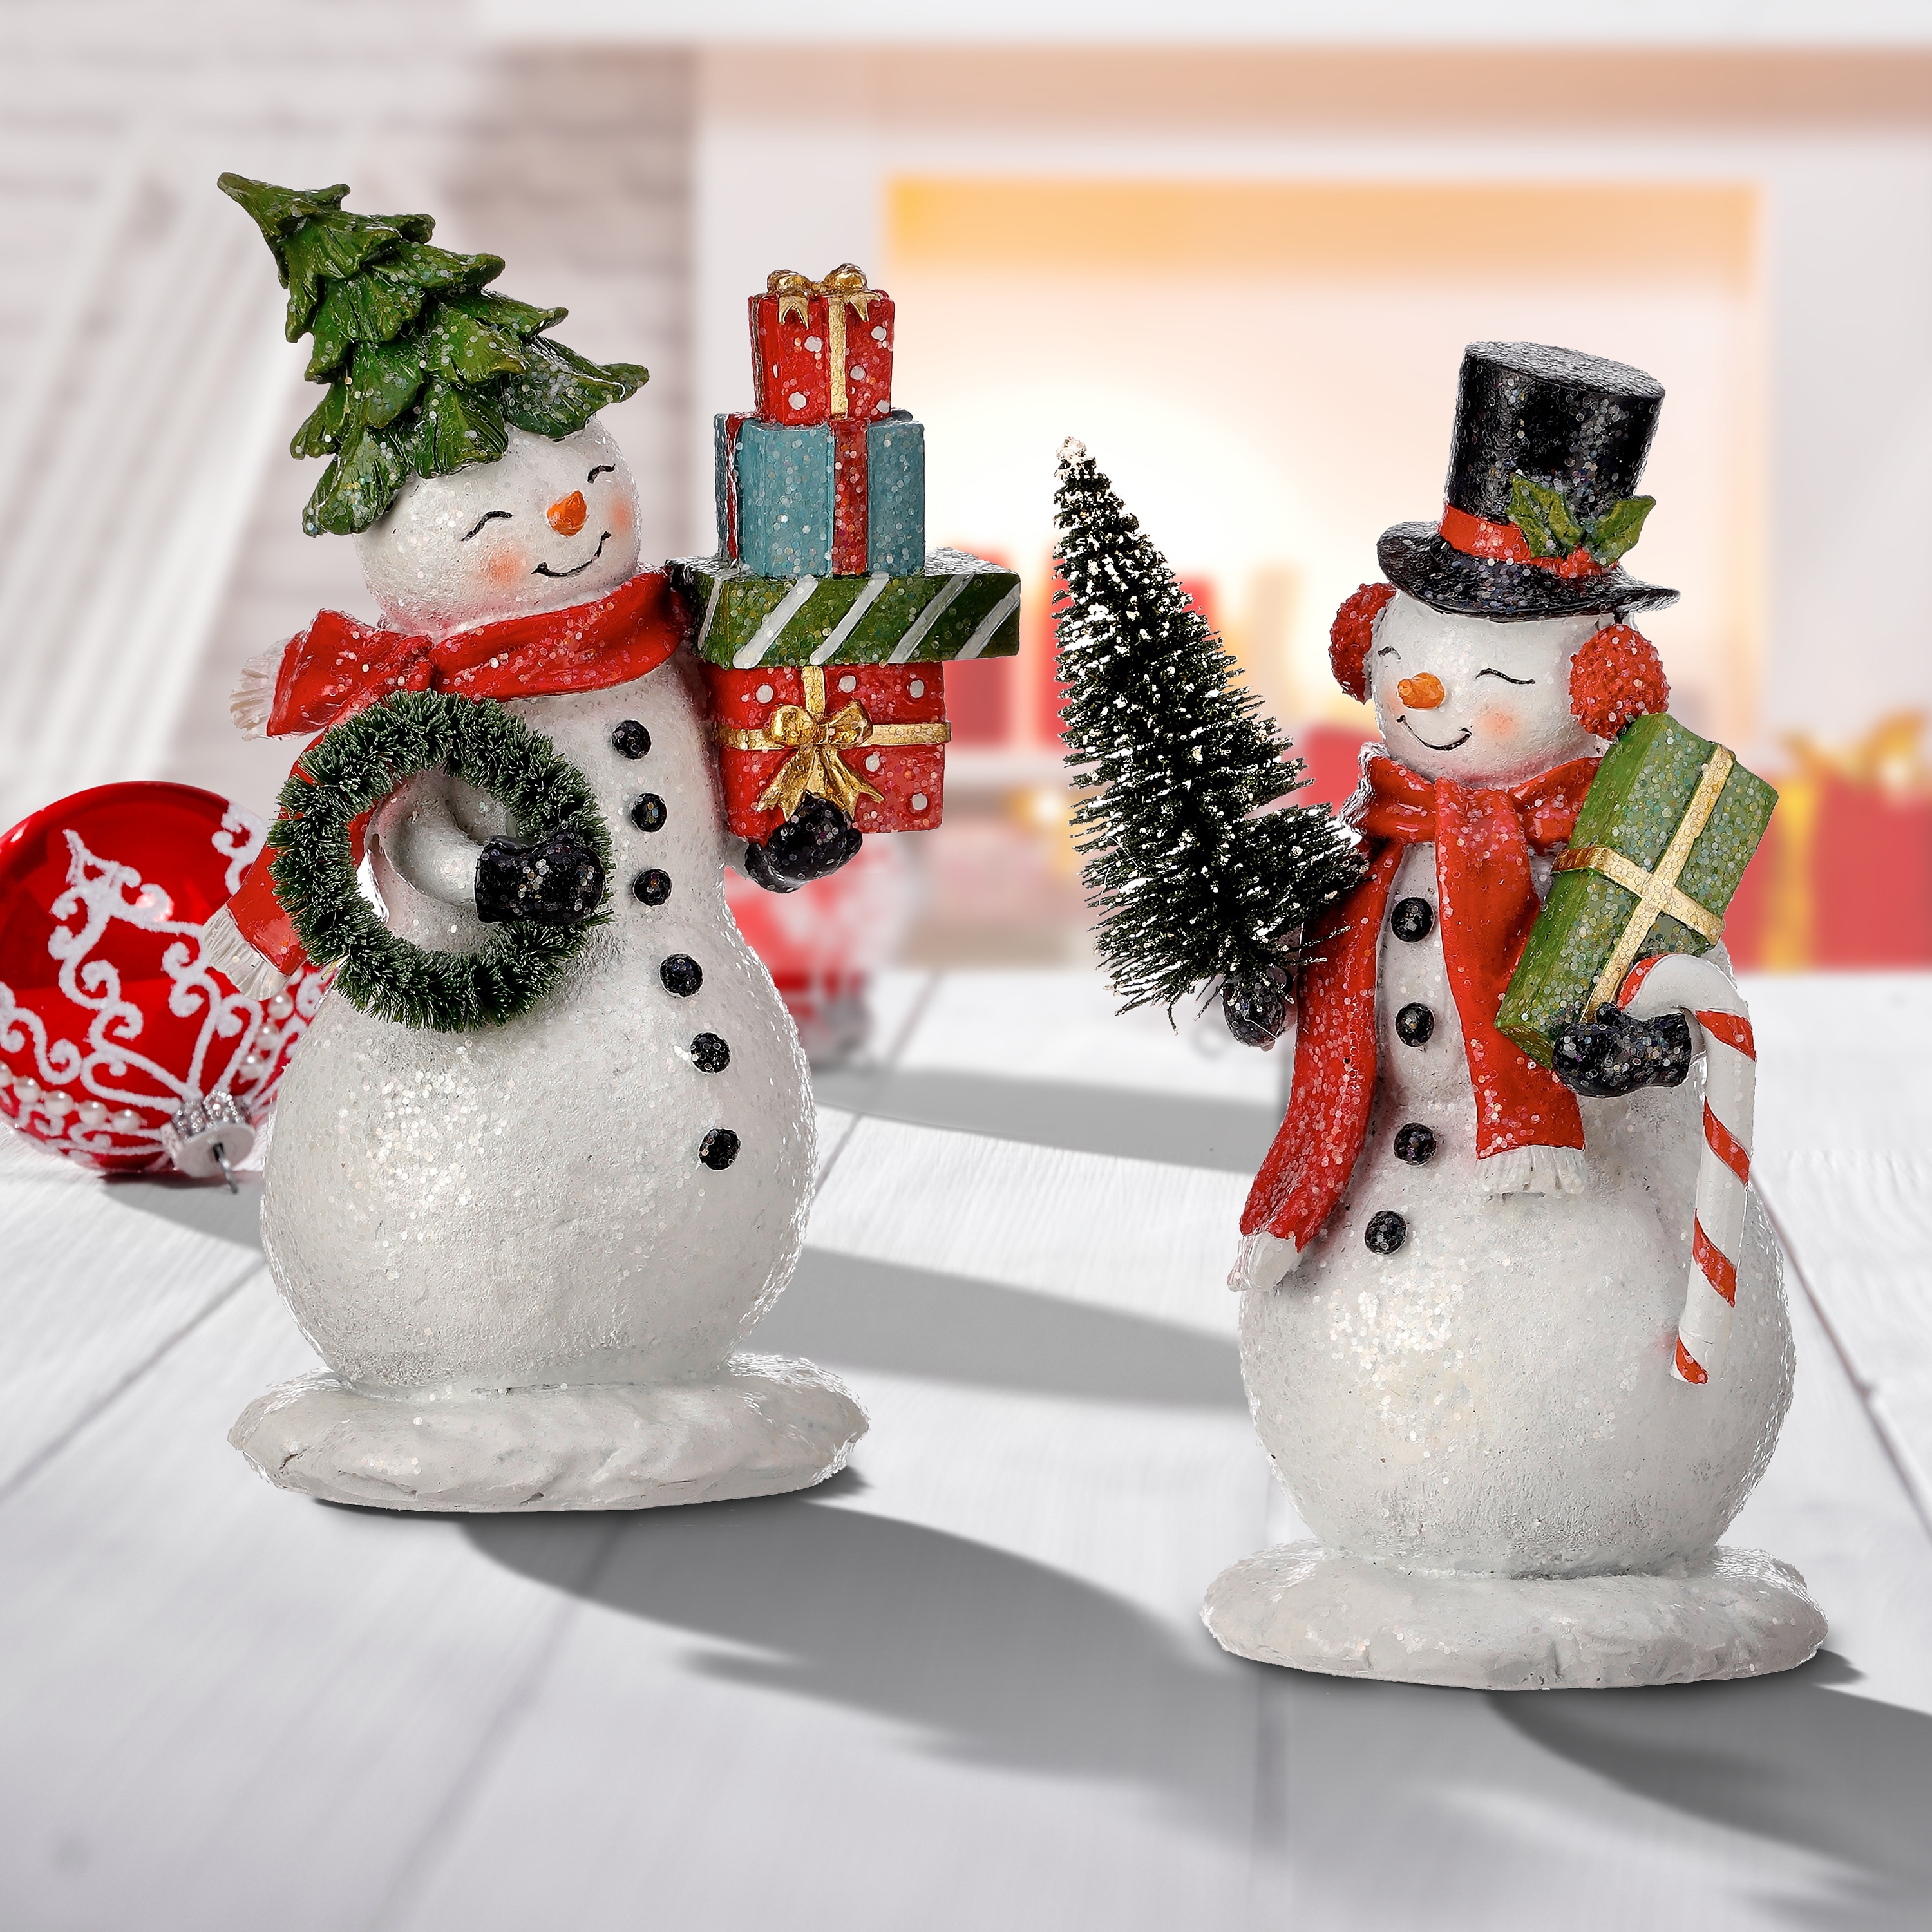 https://ak1.ostkcdn.com/images/products/is/images/direct/b4ecdab03a0844b9ad719b4b28daeb23afc7b6c8/8%22-Resin-Snowman-With-Packages-Set-of-2.jpg